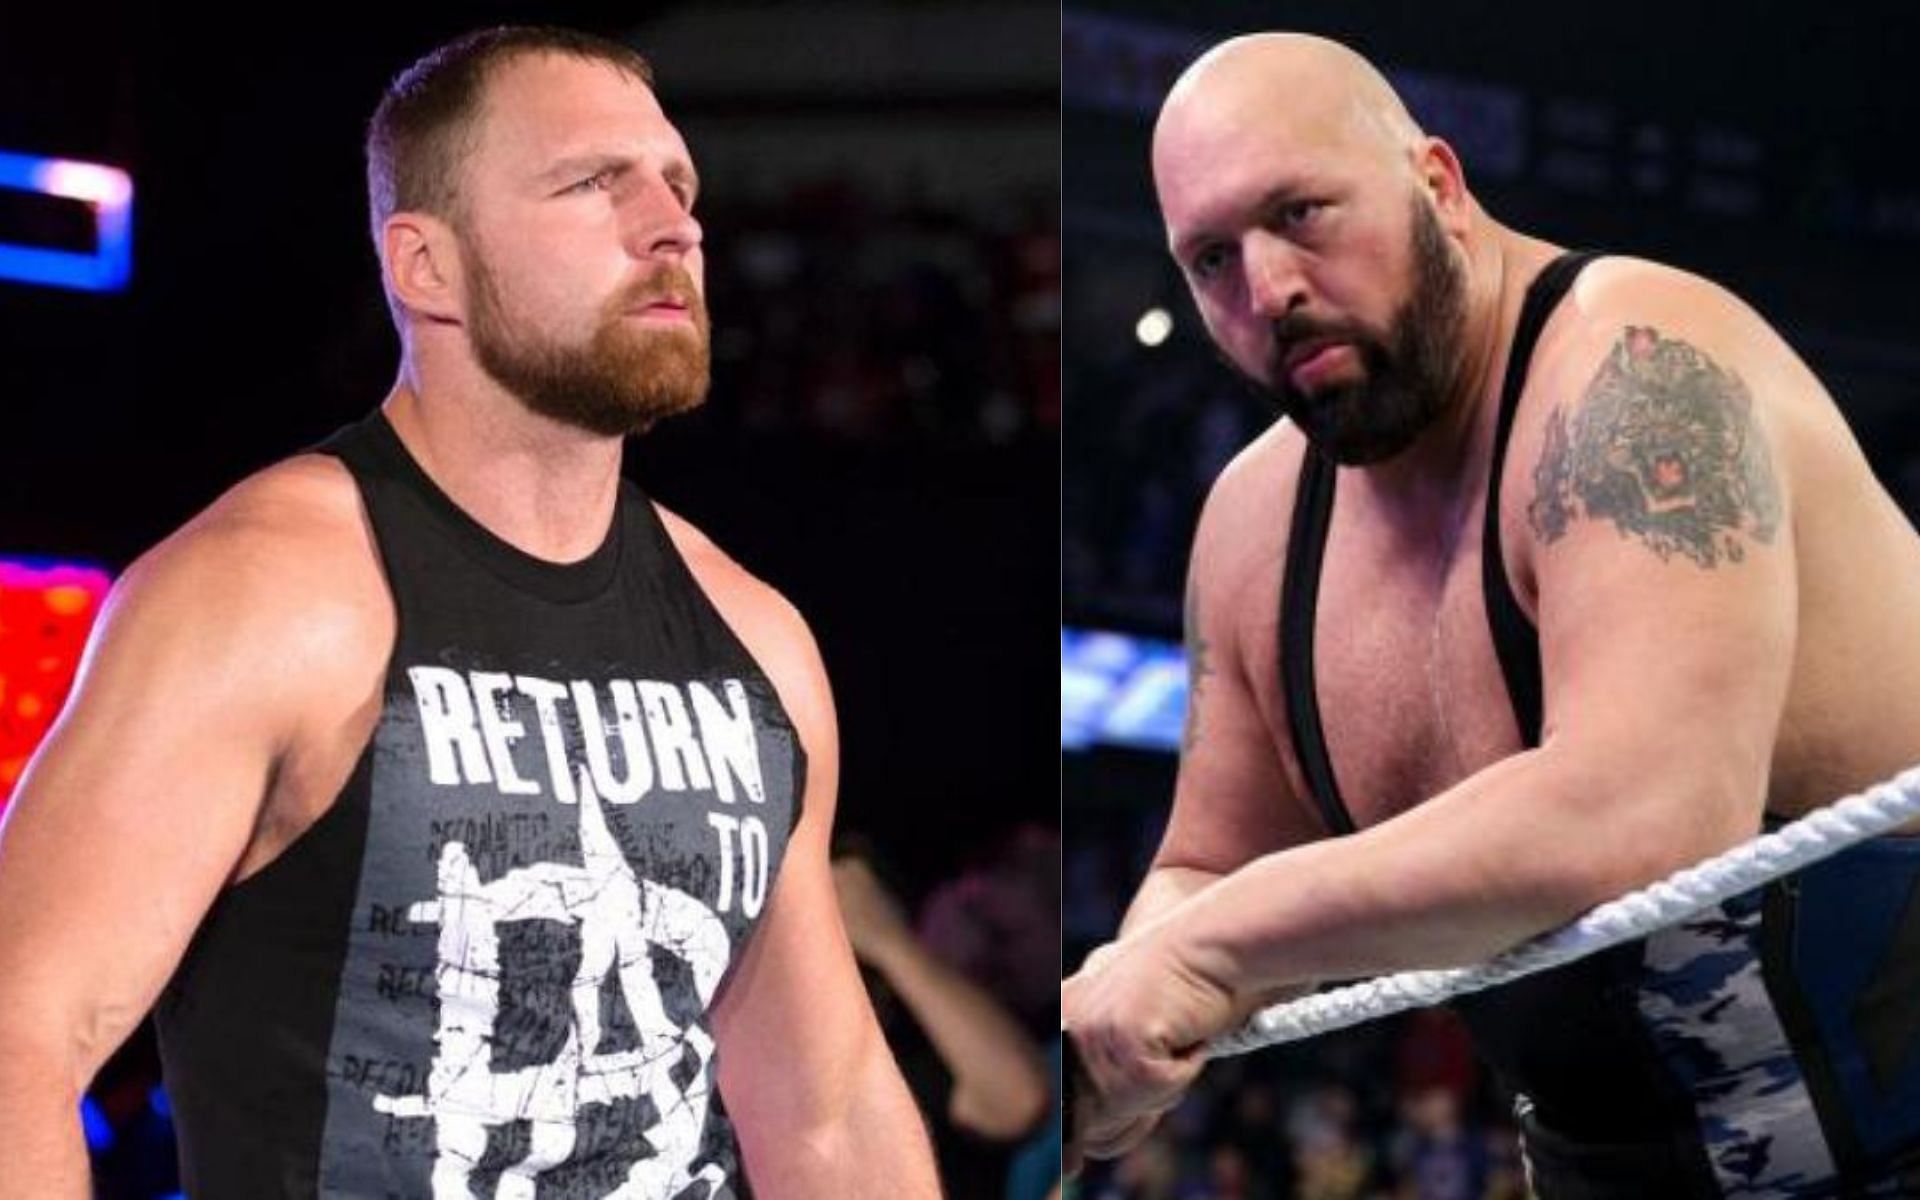 Top names such as Dean Ambrose and Big Show were done with the company